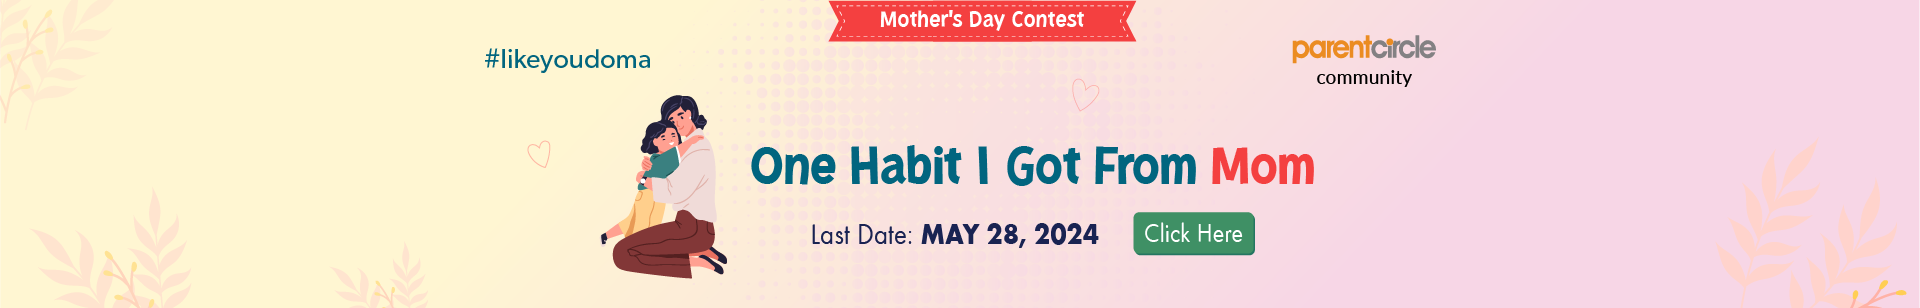 Mother's Day Contest - One Habit I Got From Mom